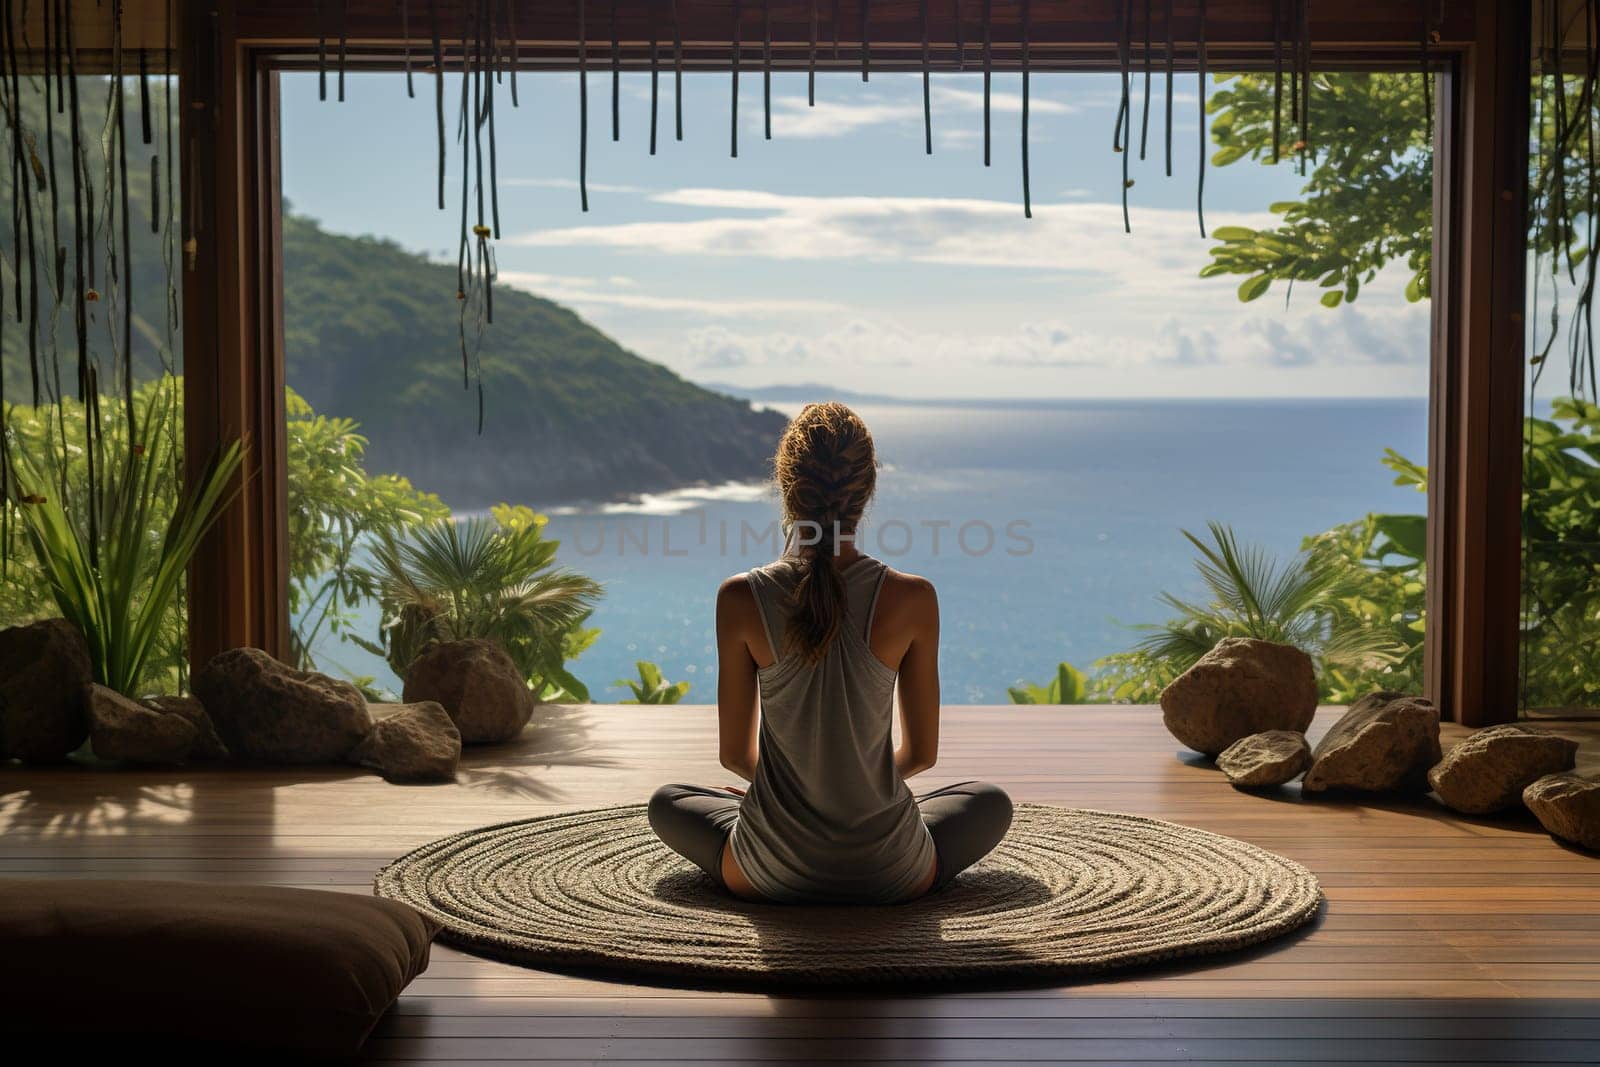 A place for yoga and meditation overlooking the ocean and mountains. The girl is meditating. Mental health concept. Generated by artificial intelligence by Vovmar